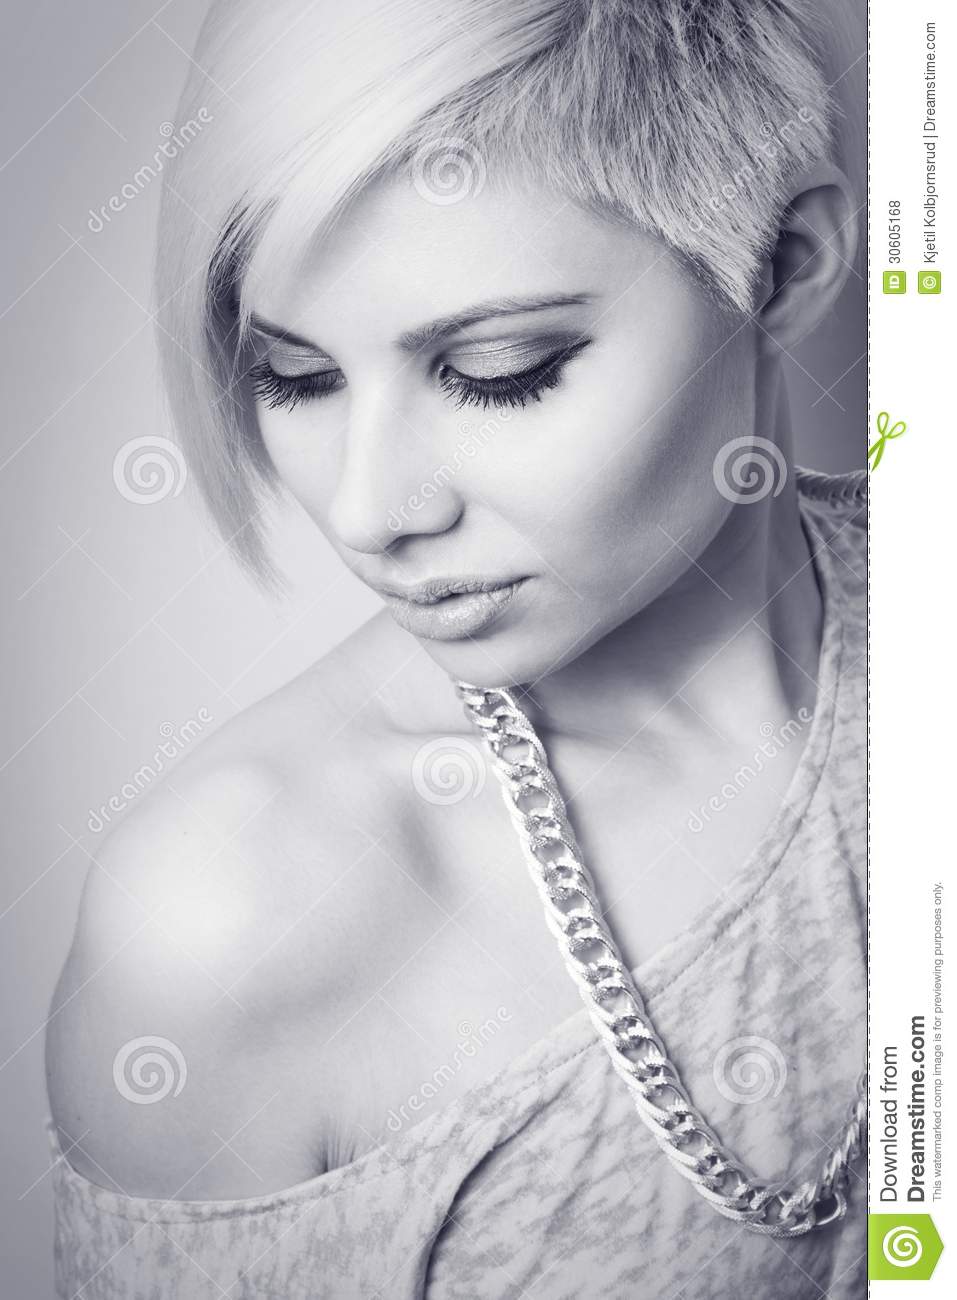 80s Style Fashion Girl Looking Down Royalty Free Stock Photos   Image    